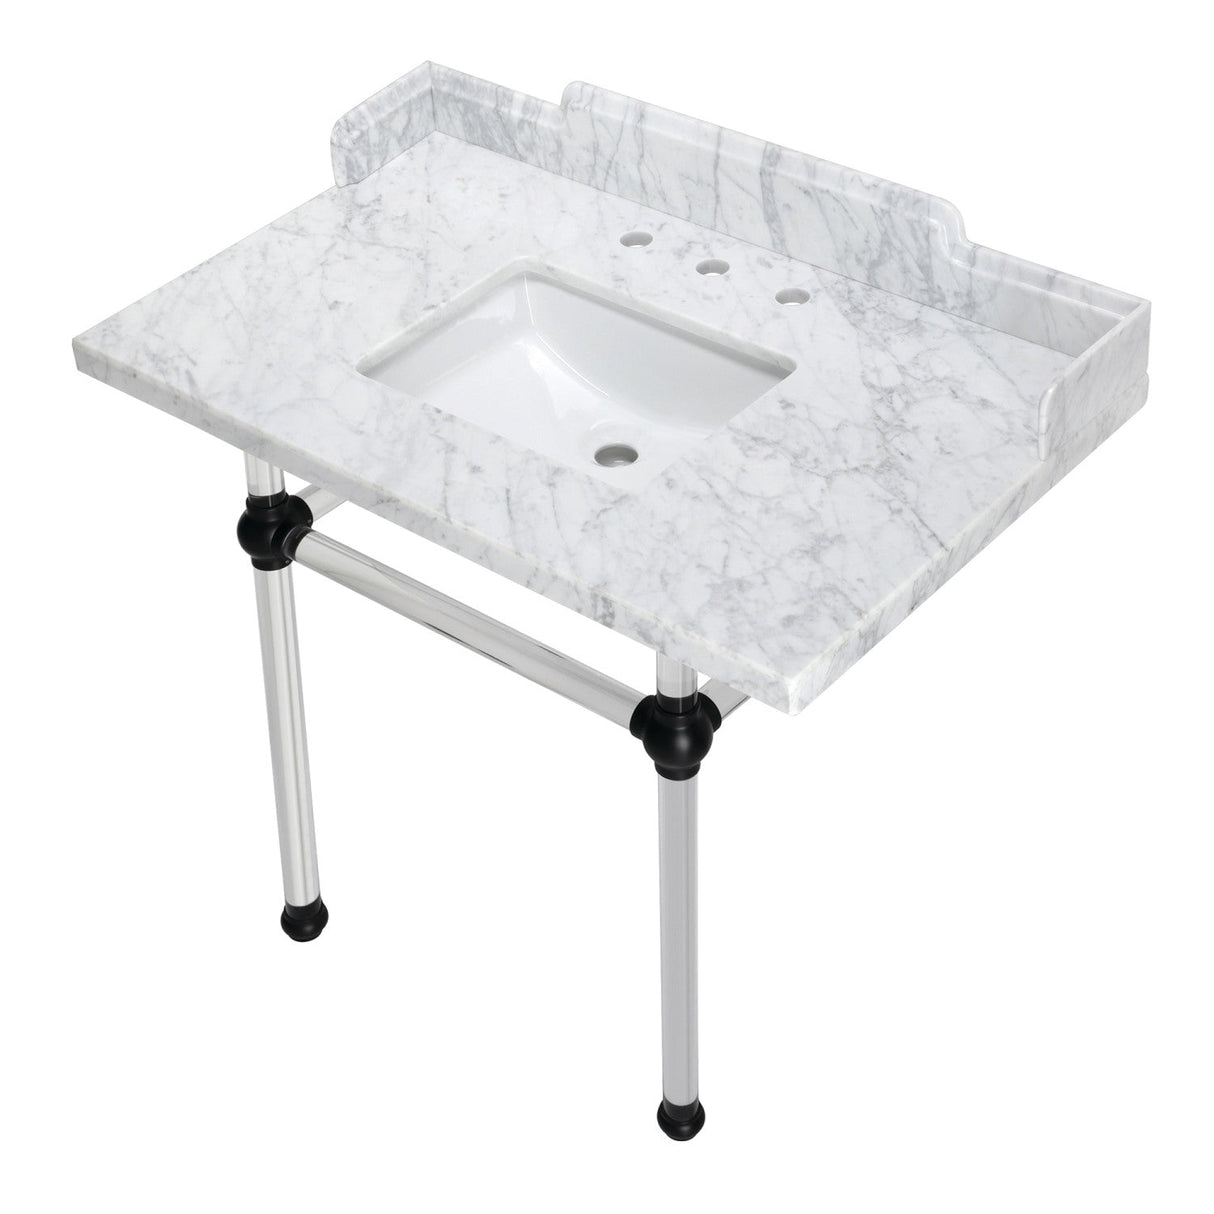 Fauceture LMS3630MASQ0 36-Inch Carrara Marble Console Sink with Acrylic Legs, Marble White/Matte Black